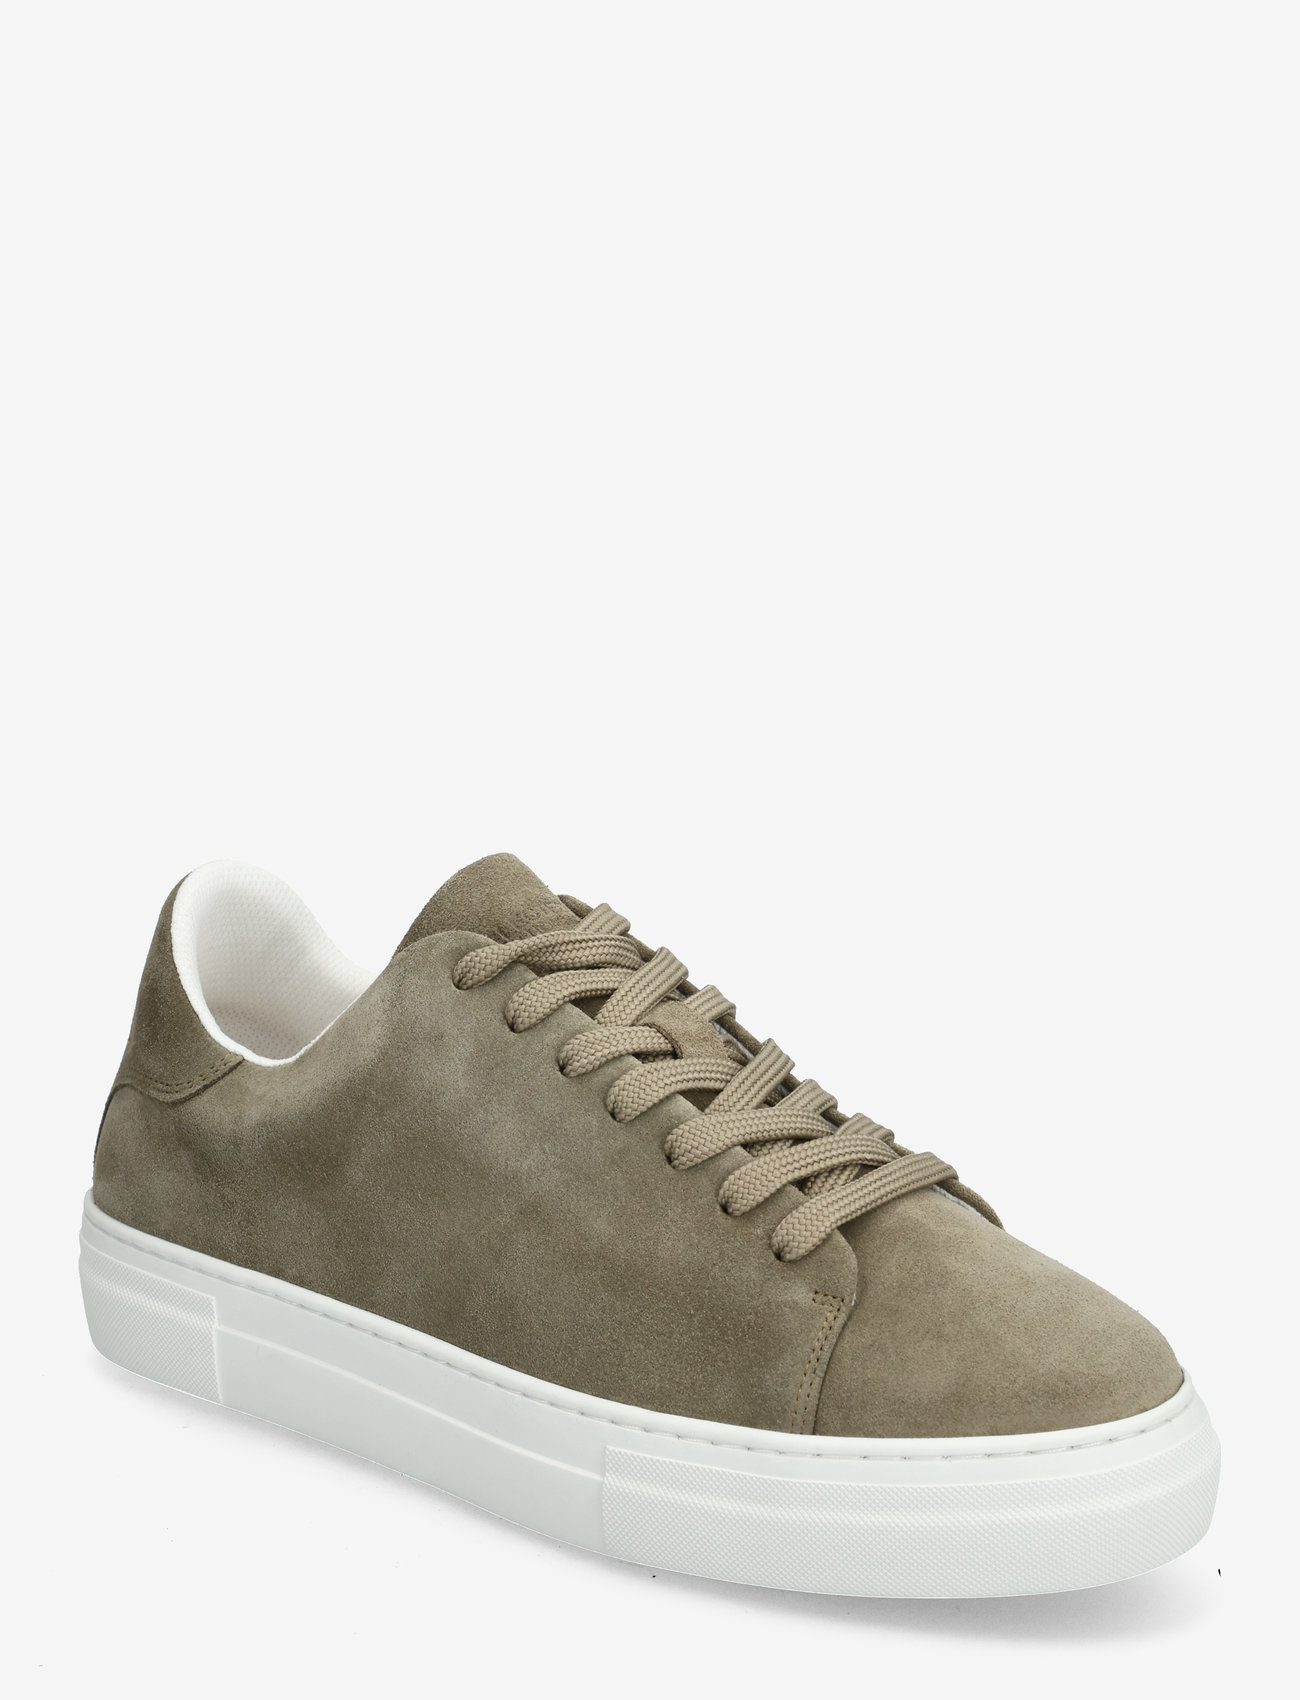 Selected Homme - SLHDAVID CHUNKY CLEAN SUEDE TRAINER B - low tops - grape leaf - 0